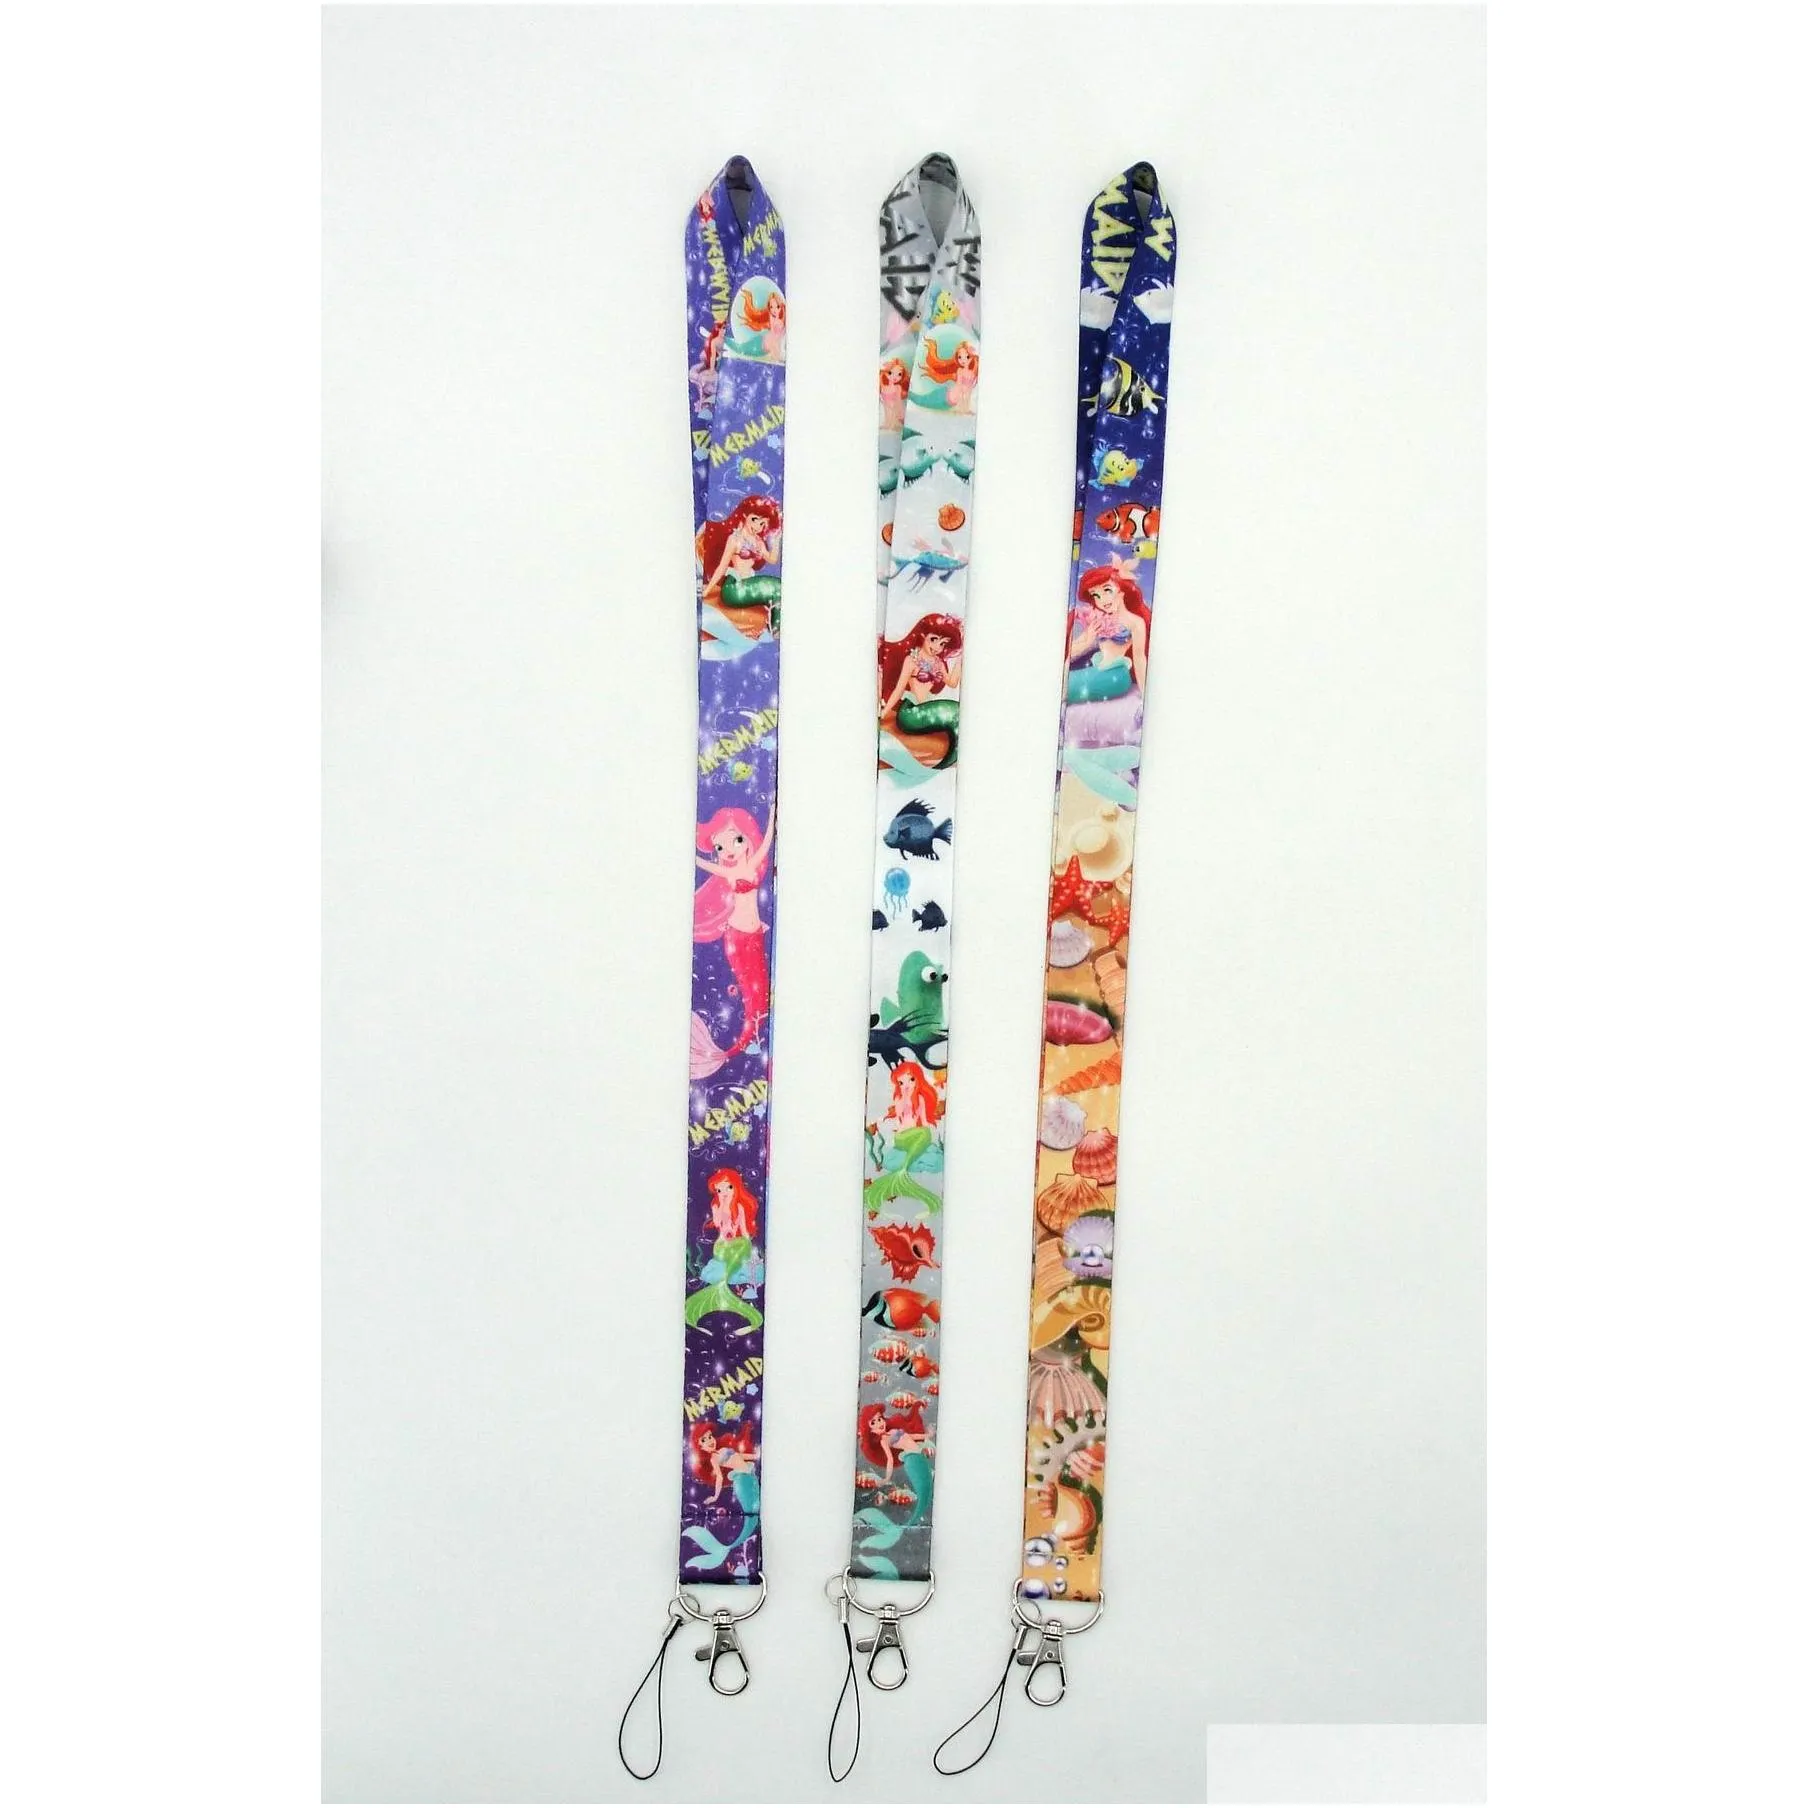 factory price 100 piec mermaid anime lanyard keychain neck strap key camera id phone string pendant badge party gift accessories